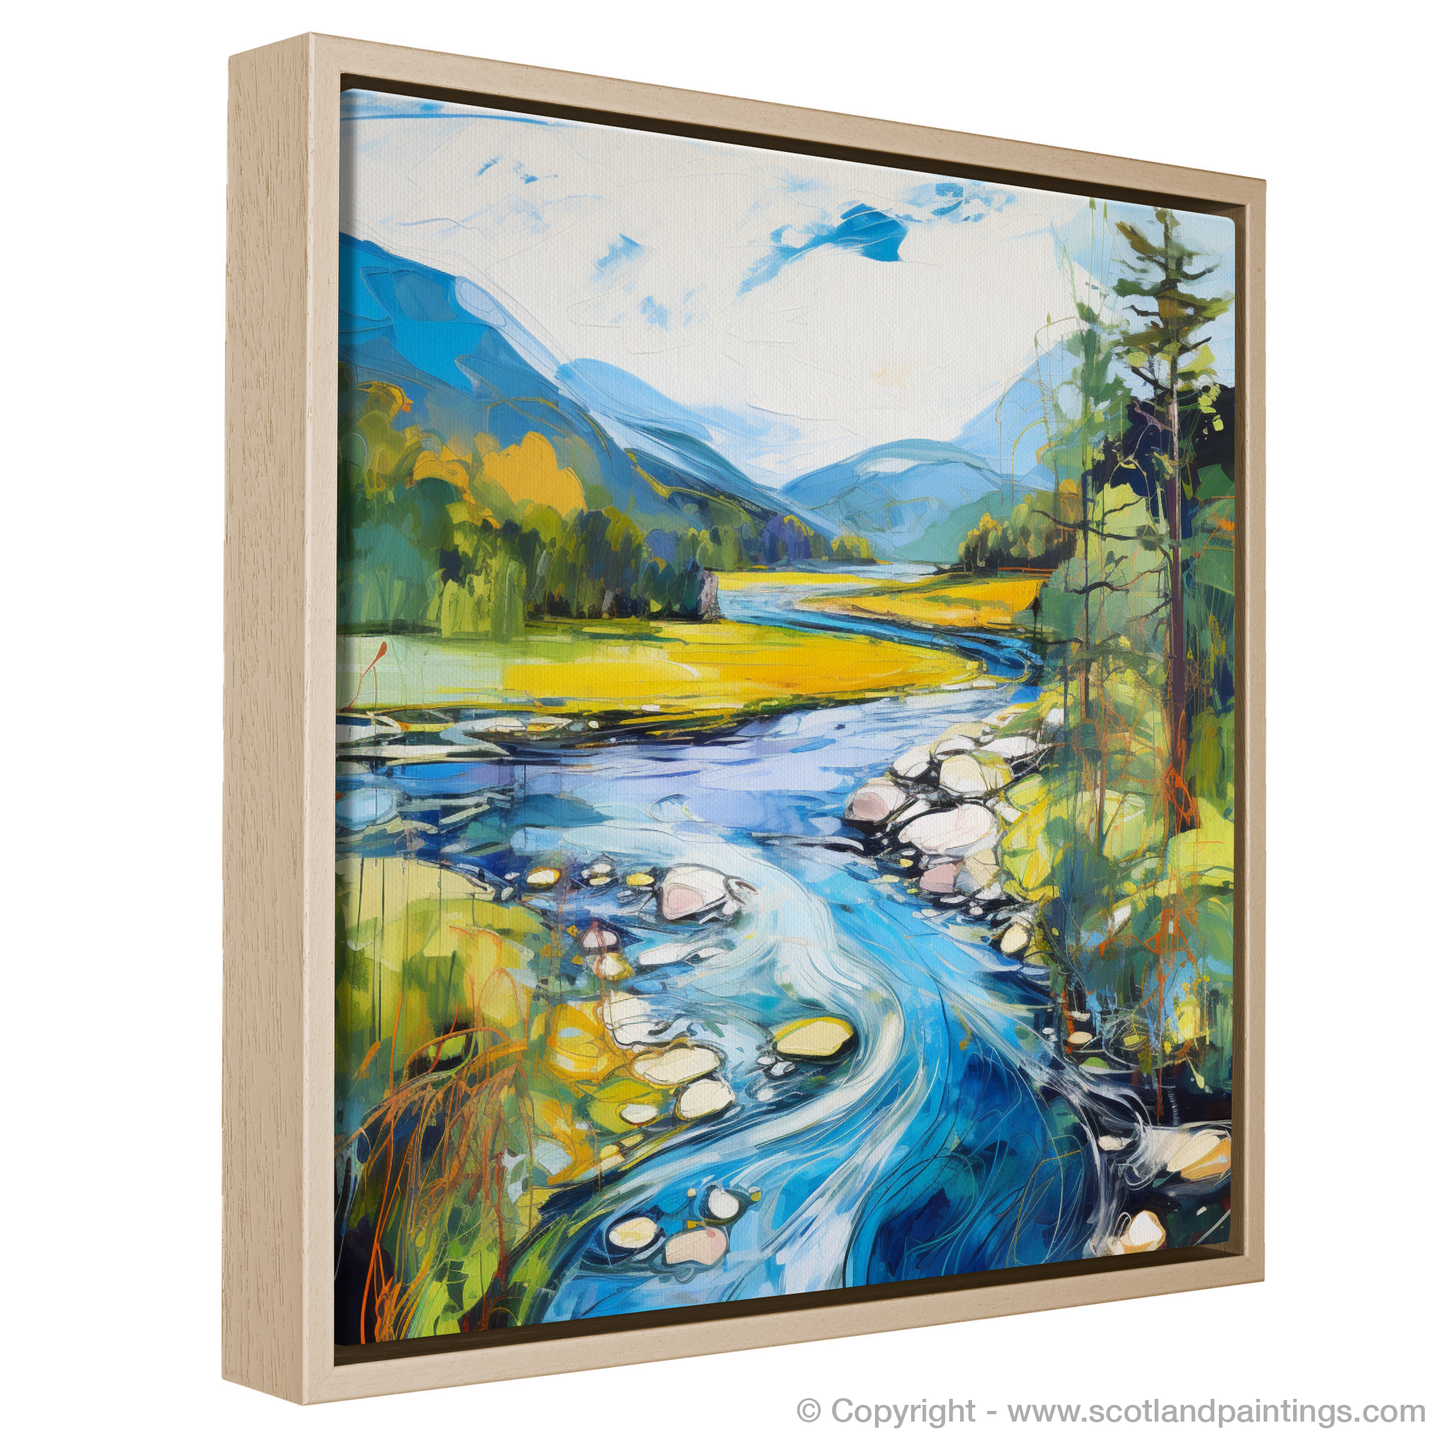 Painting and Art Print of River Orchy, Argyll and Bute in summer entitled "Summer’s Embrace at River Orchy".